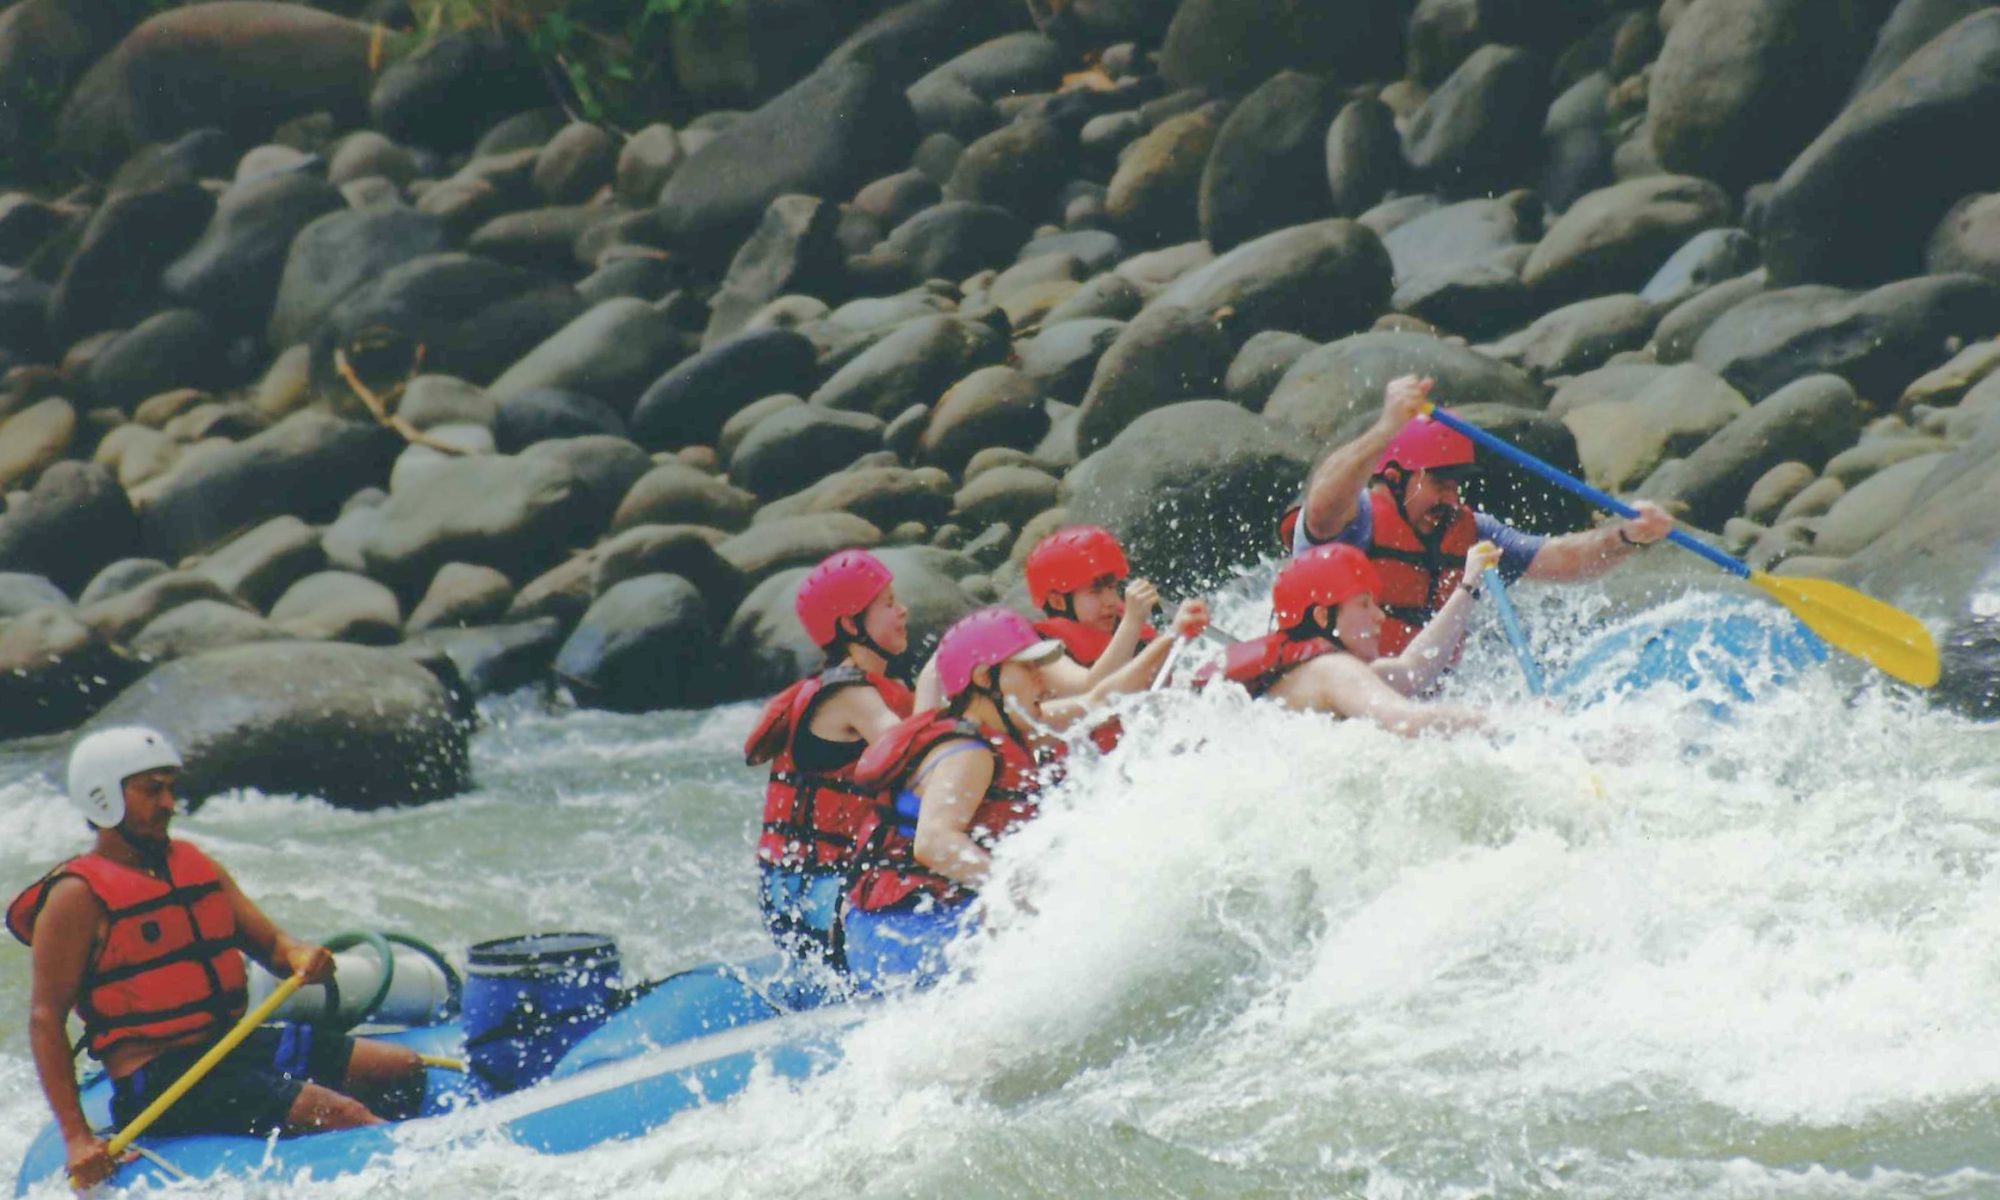 My family rafting through the rapids with our guide